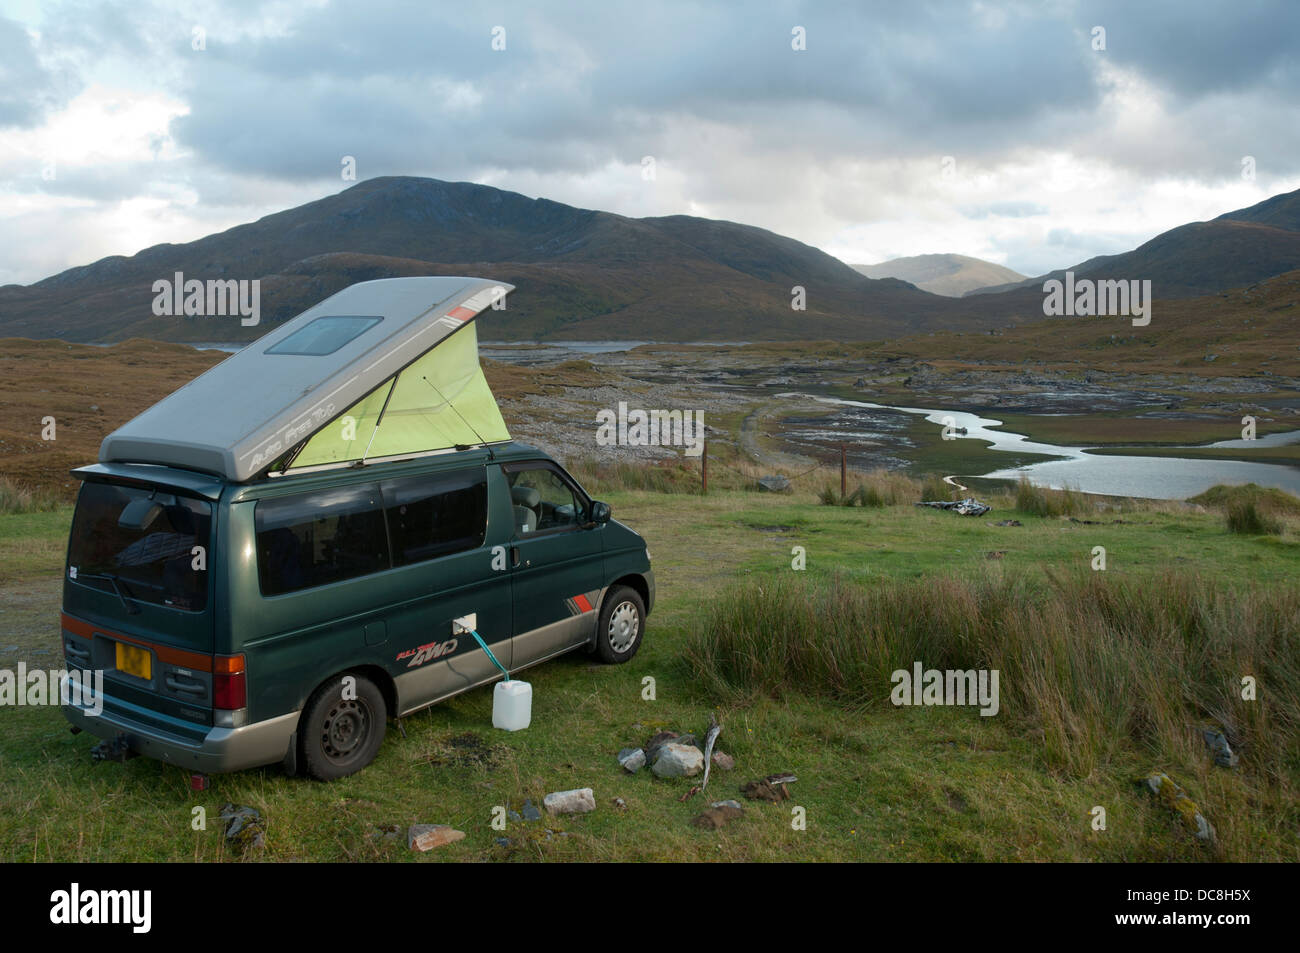 Mazda Bongo Campervan High Resolution Stock Photography and Images - Alamy